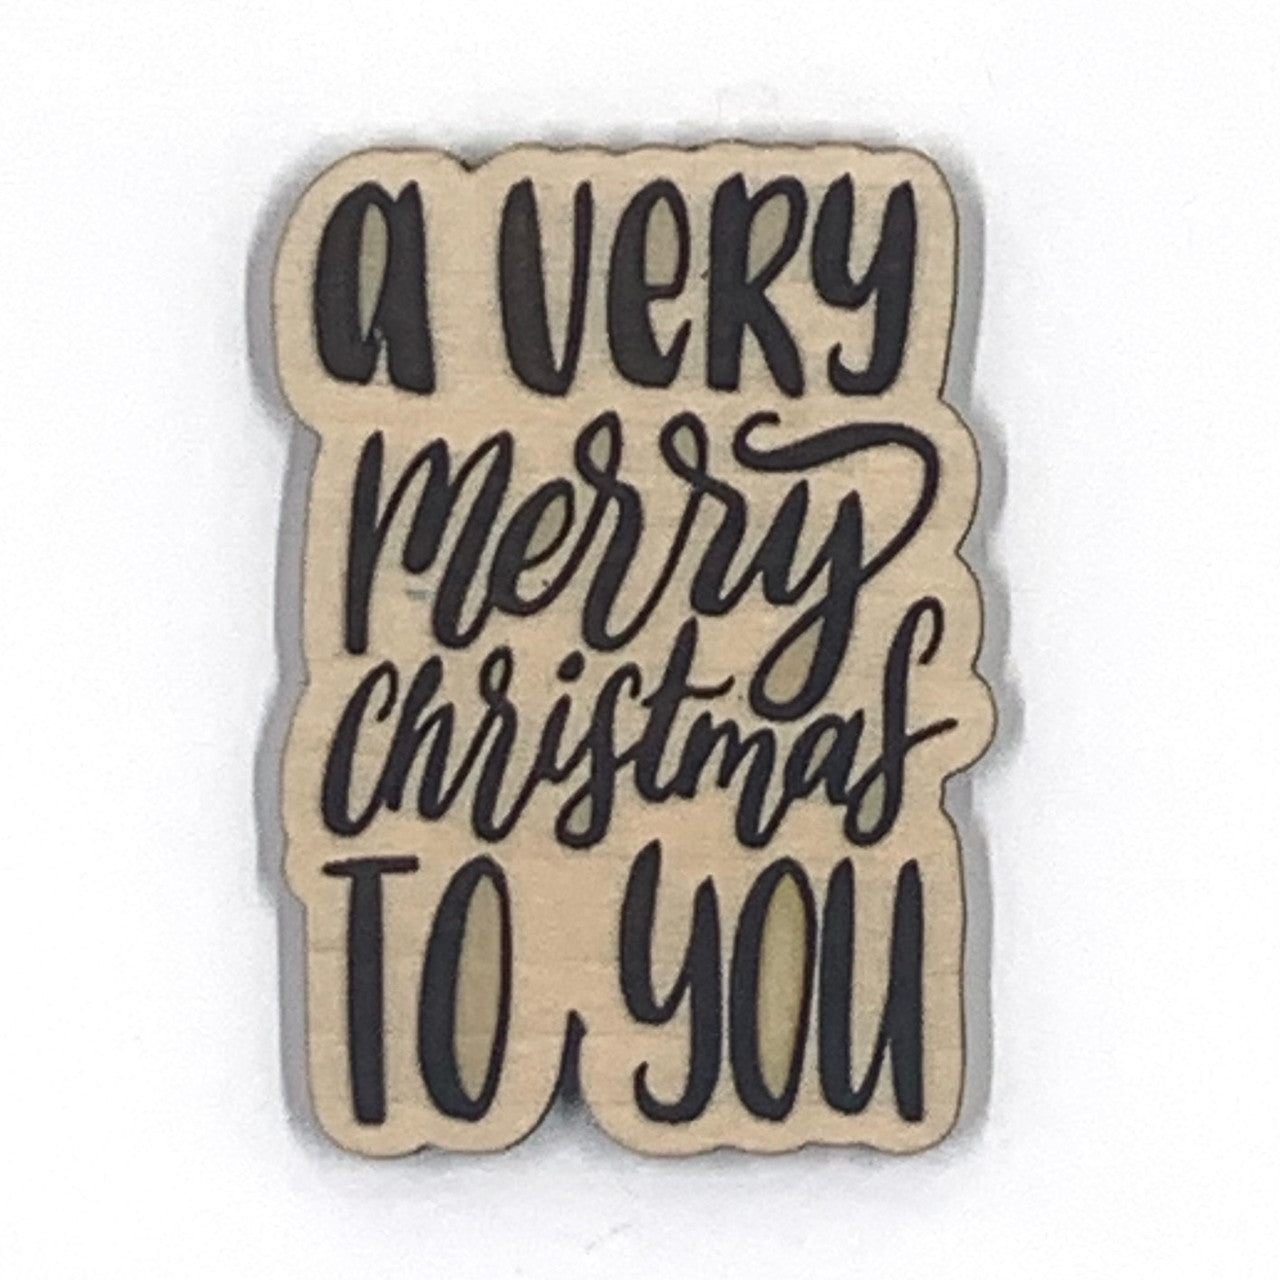 A Very Merry Christmas To You Wooden Embellishment